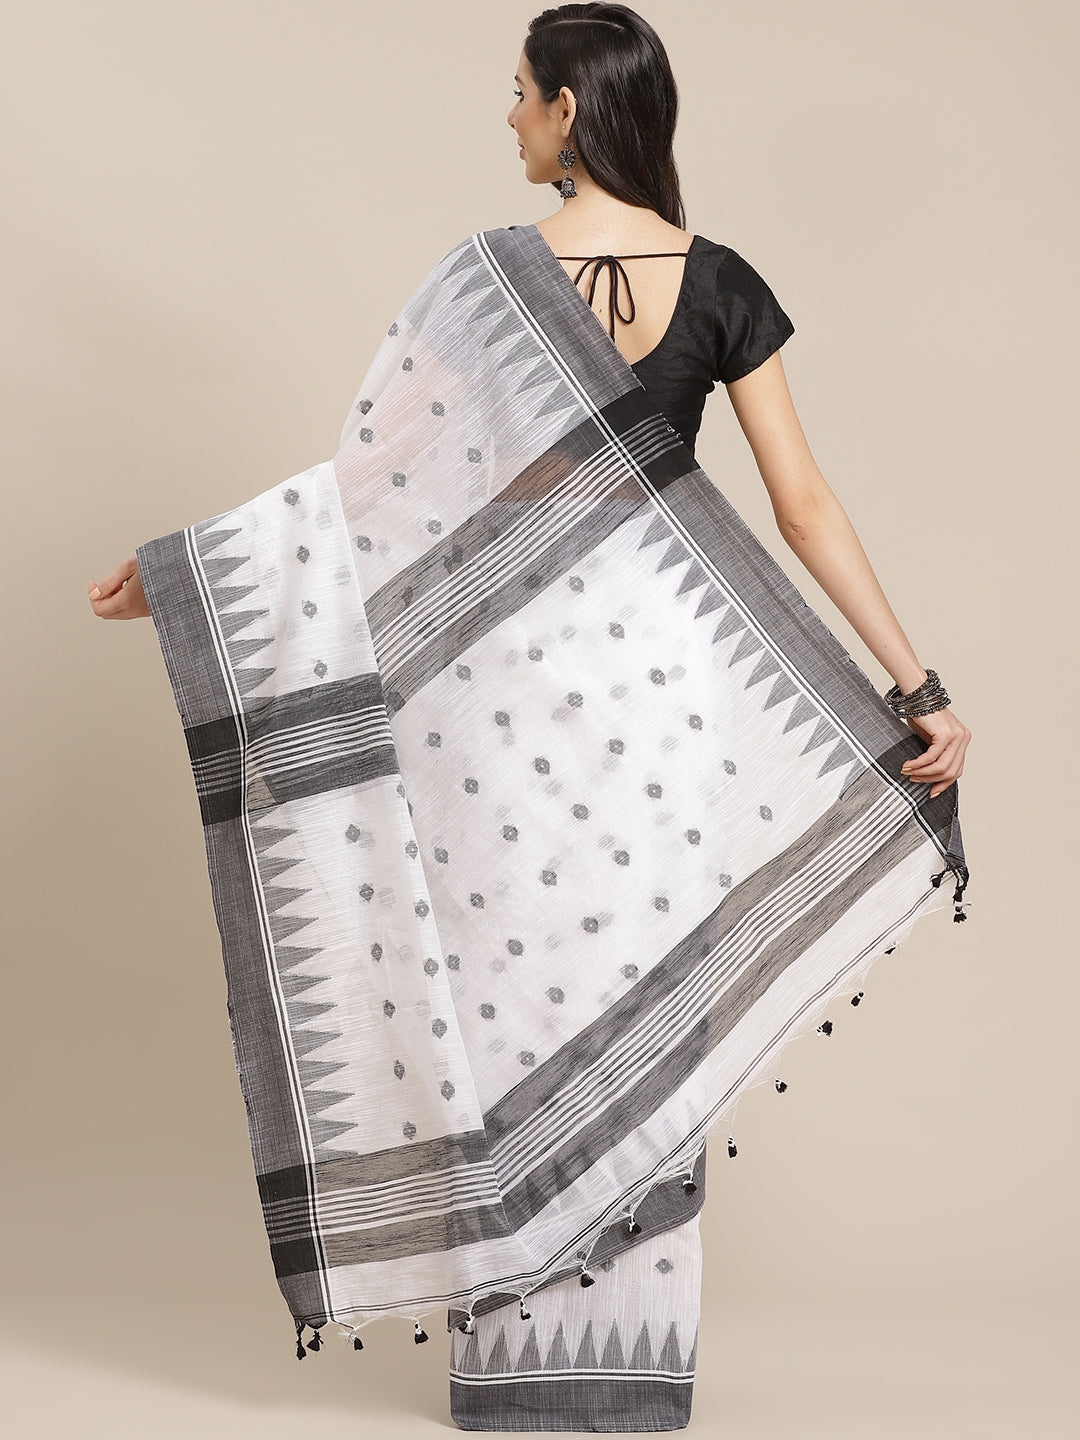 White and Grey, Kalakari India Ikat Silk Cotton Woven Design Saree with Blouse SHBESA0043-Saree-Kalakari India-SHBESA0043-Bengal, Cotton, Geographical Indication, Hand Crafted, Heritage Prints, Ikkat, Natural Dyes, Red, Sarees, Sustainable Fabrics, Woven, Yellow-[Linen,Ethnic,wear,Fashionista,Handloom,Handicraft,Indigo,blockprint,block,print,Cotton,Chanderi,Blue, latest,classy,party,bollywood,trendy,summer,style,traditional,formal,elegant,unique,style,hand,block,print, dabu,booti,gift,present,gl